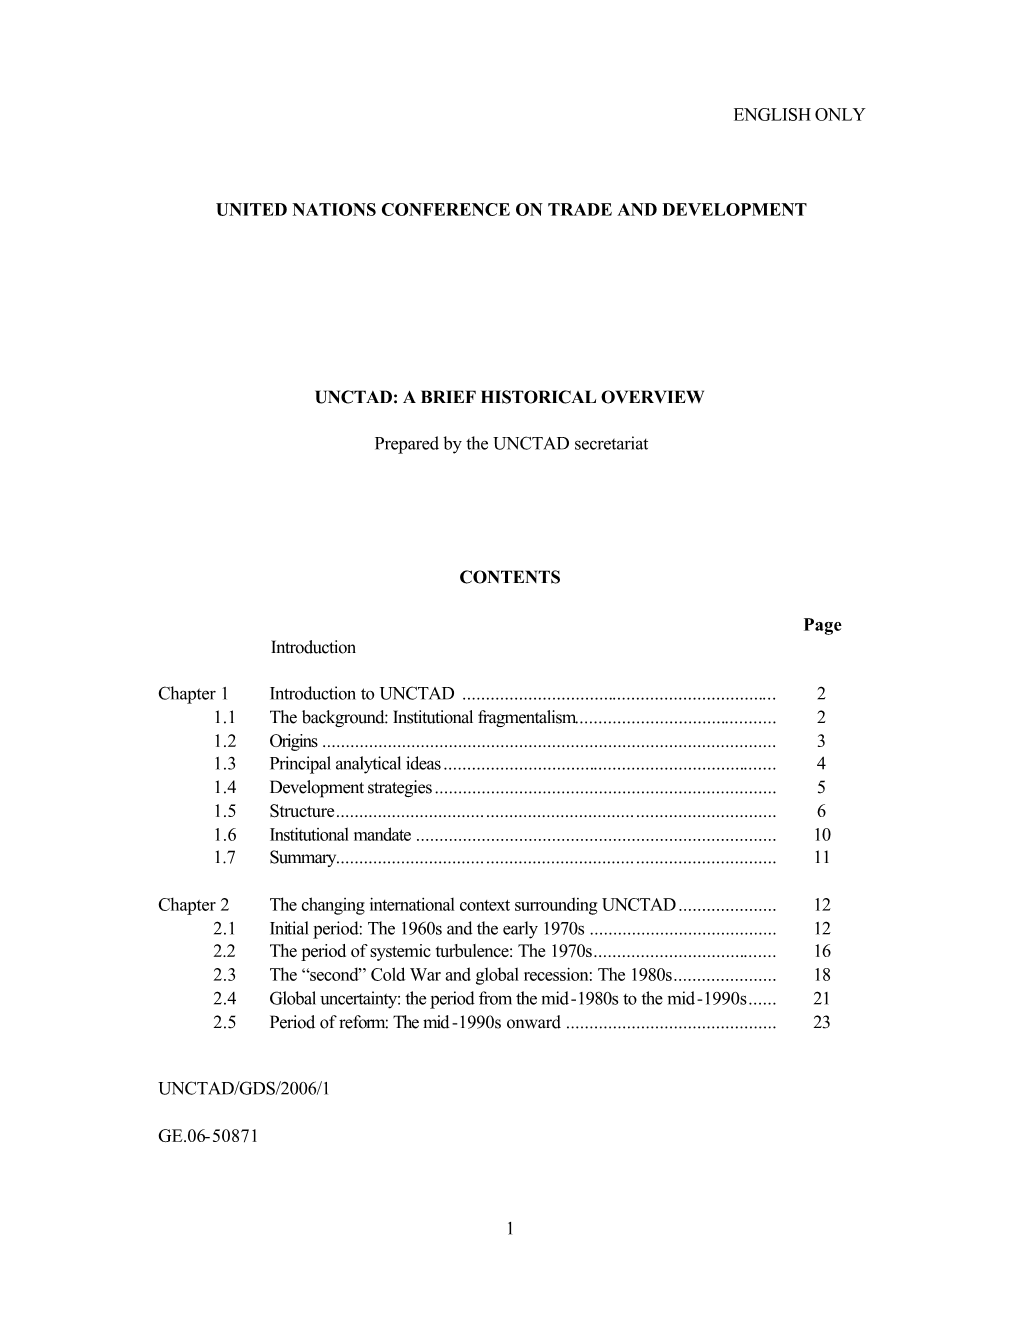 A BRIEF HISTORICAL OVERVIEW Prepared by the UNCTAD